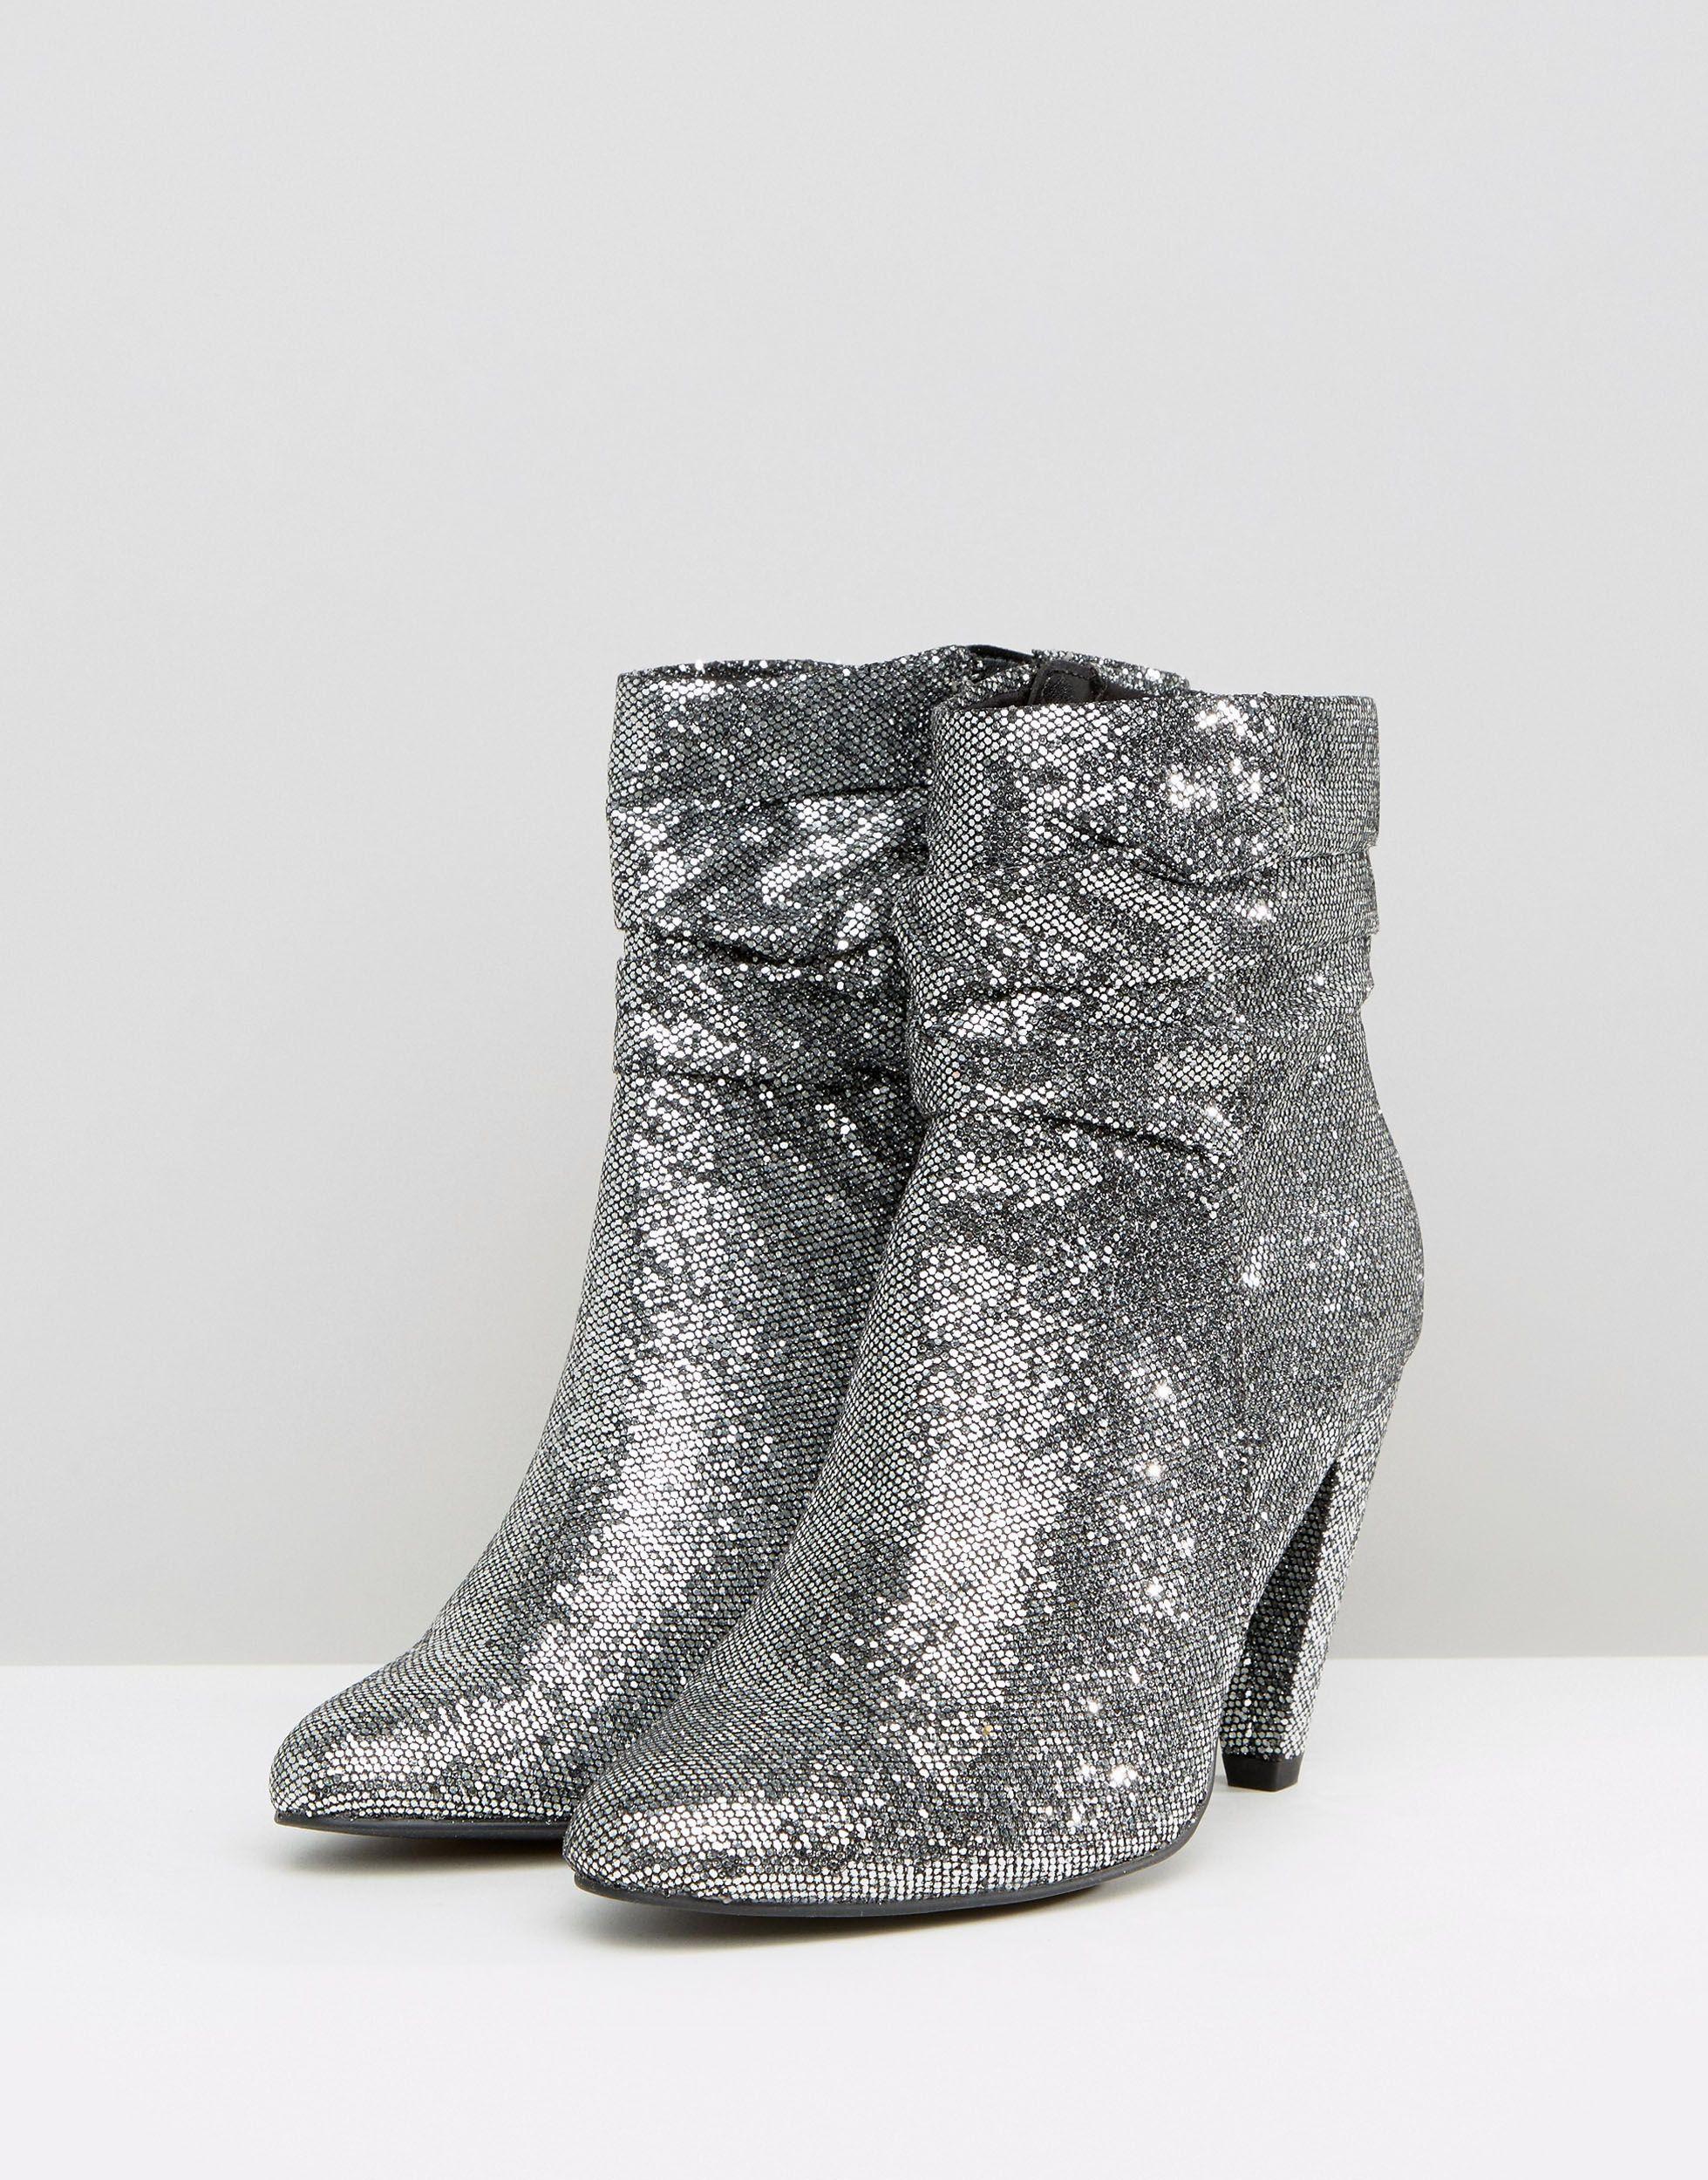 wide fit silver glitter shoes